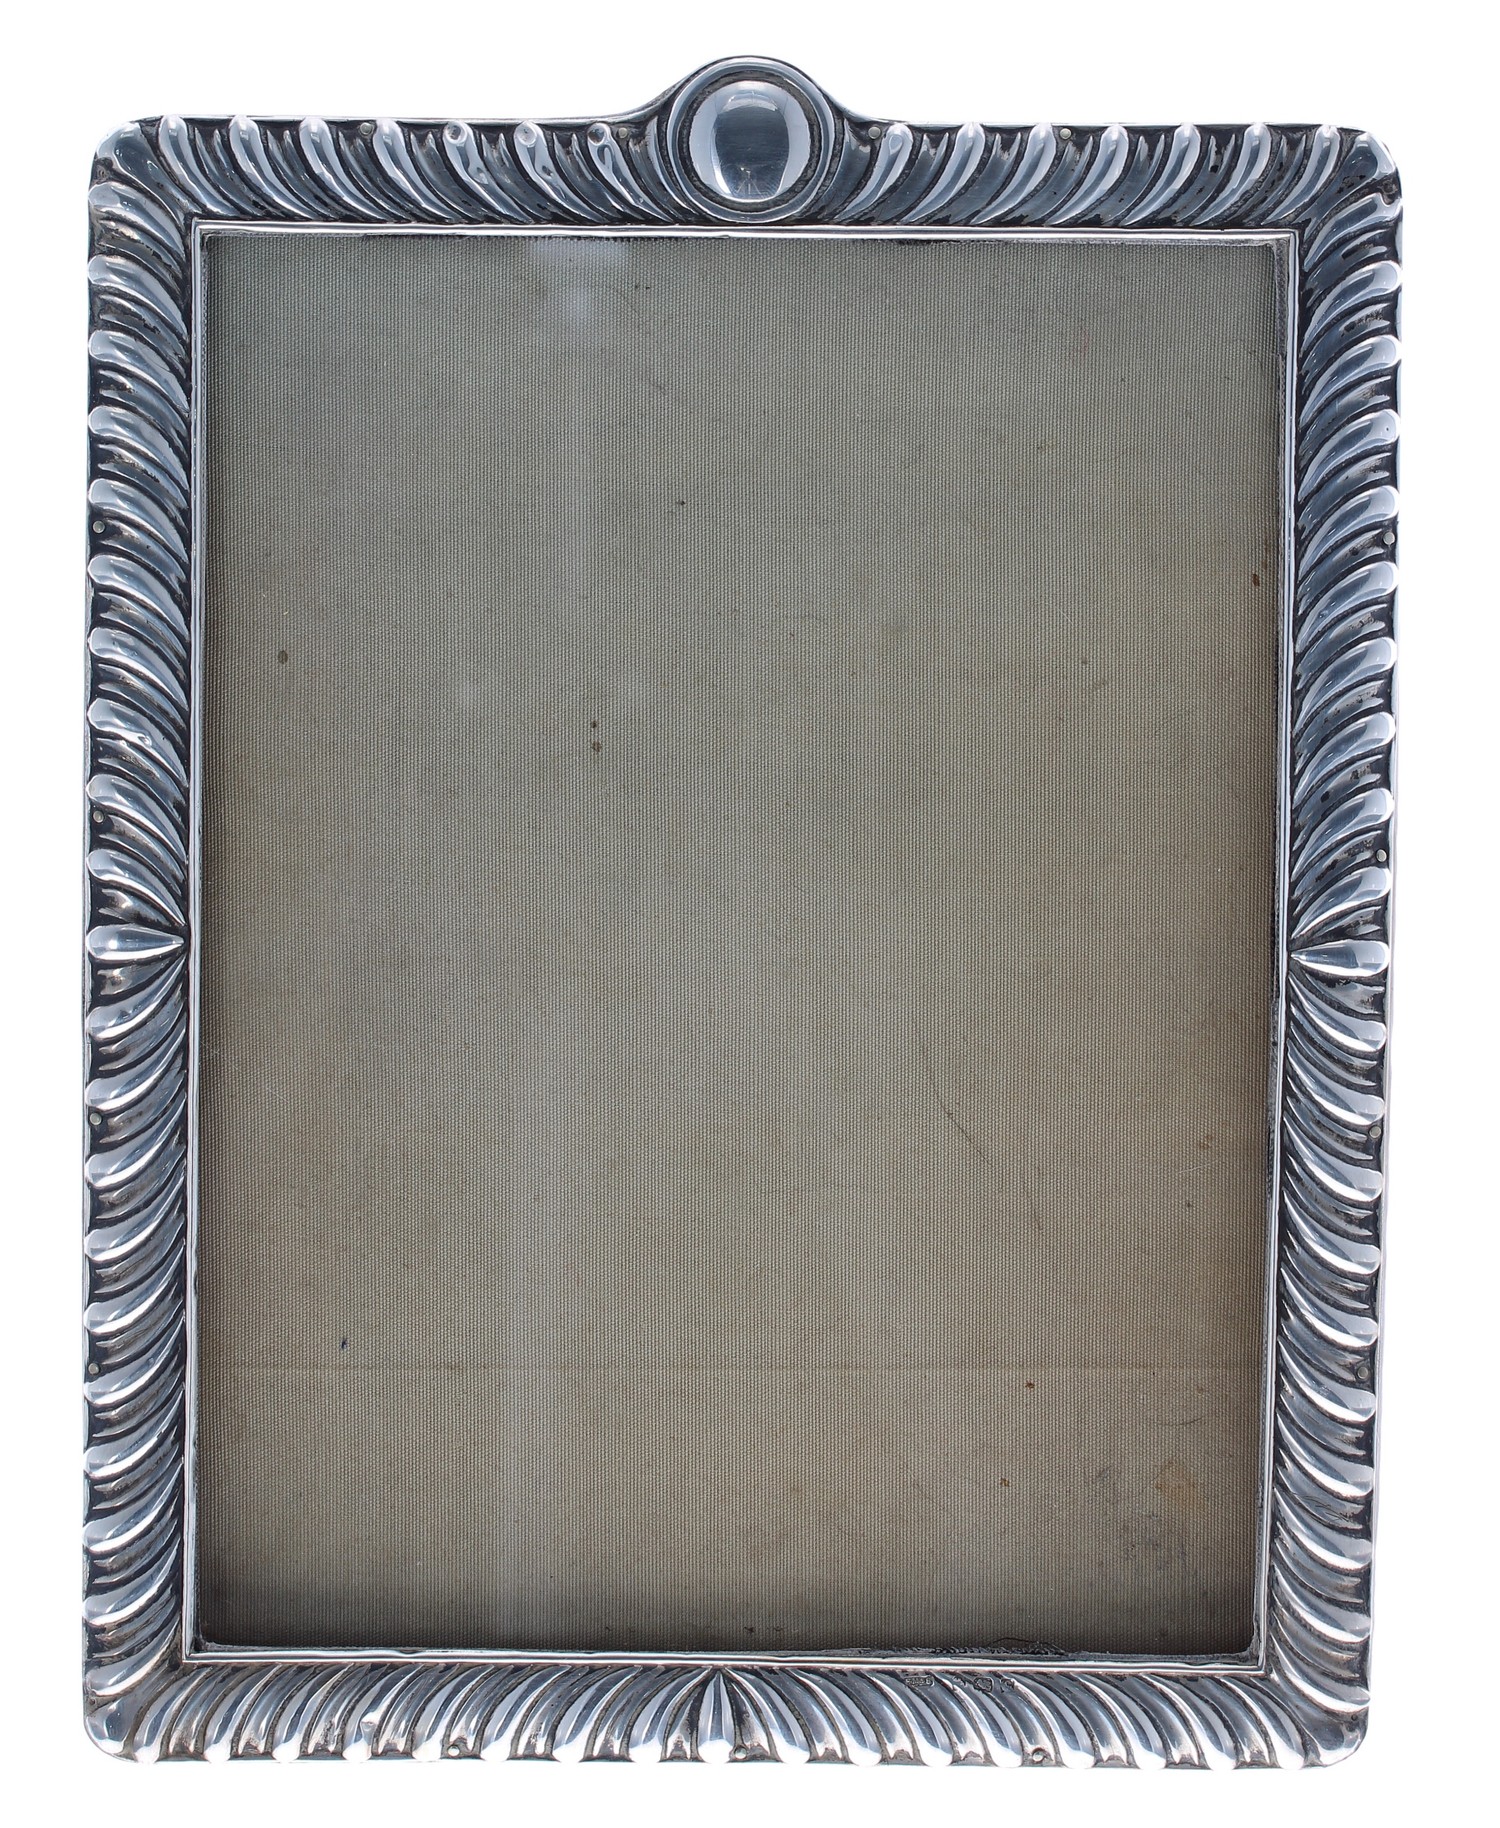 Edwardian repousse silver photograph frame by E Mander & Son, Birmingham 1902, 7.5" x 10" overall